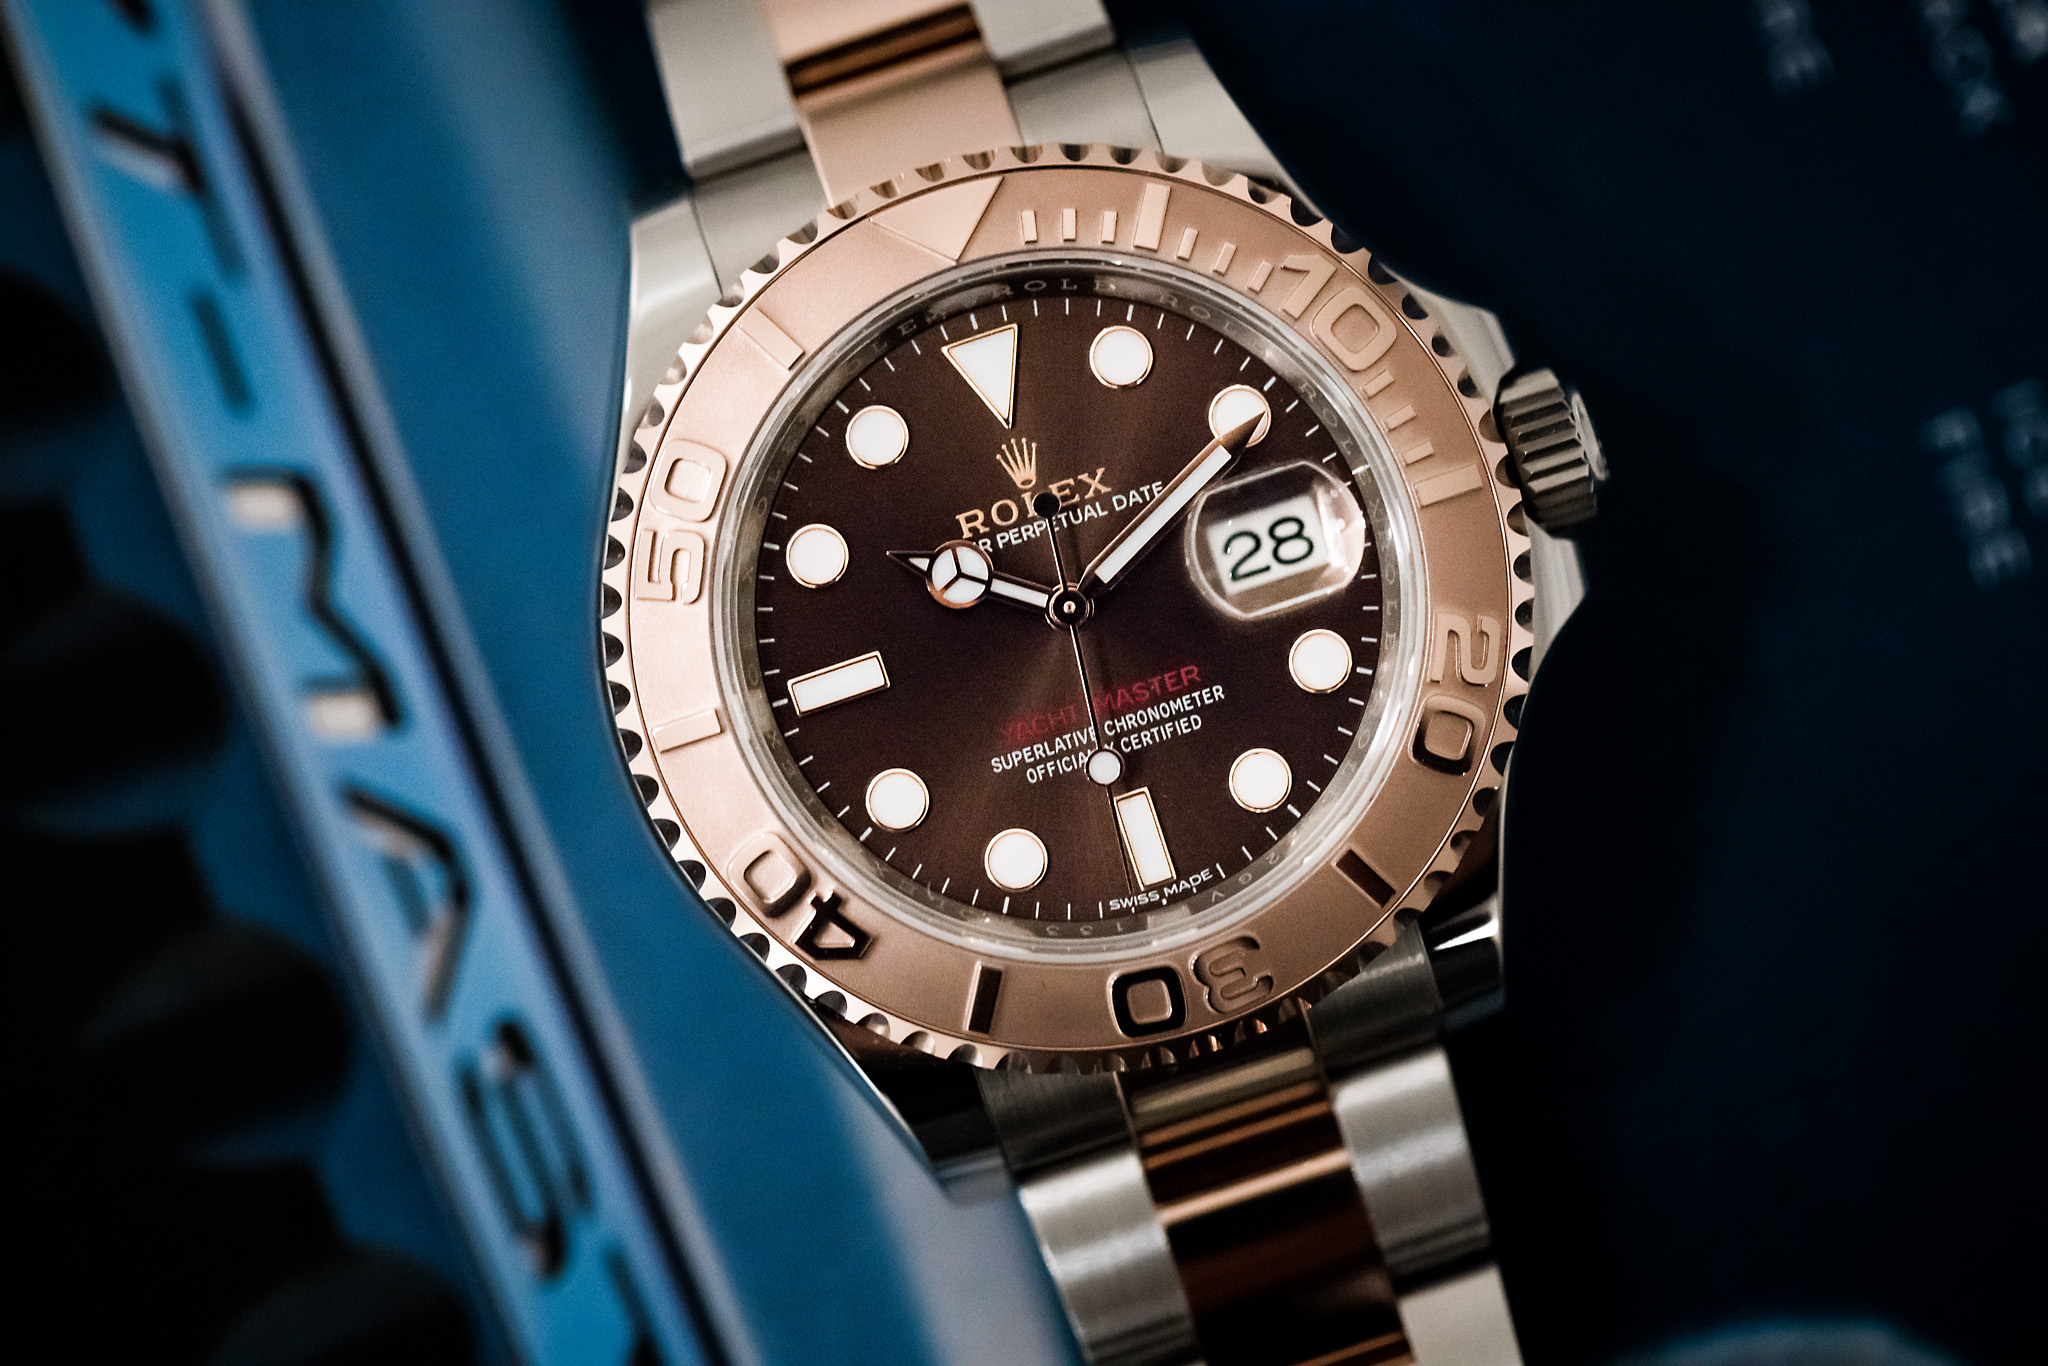 Five Good Reasons to Love the 2016 Rolex Collection